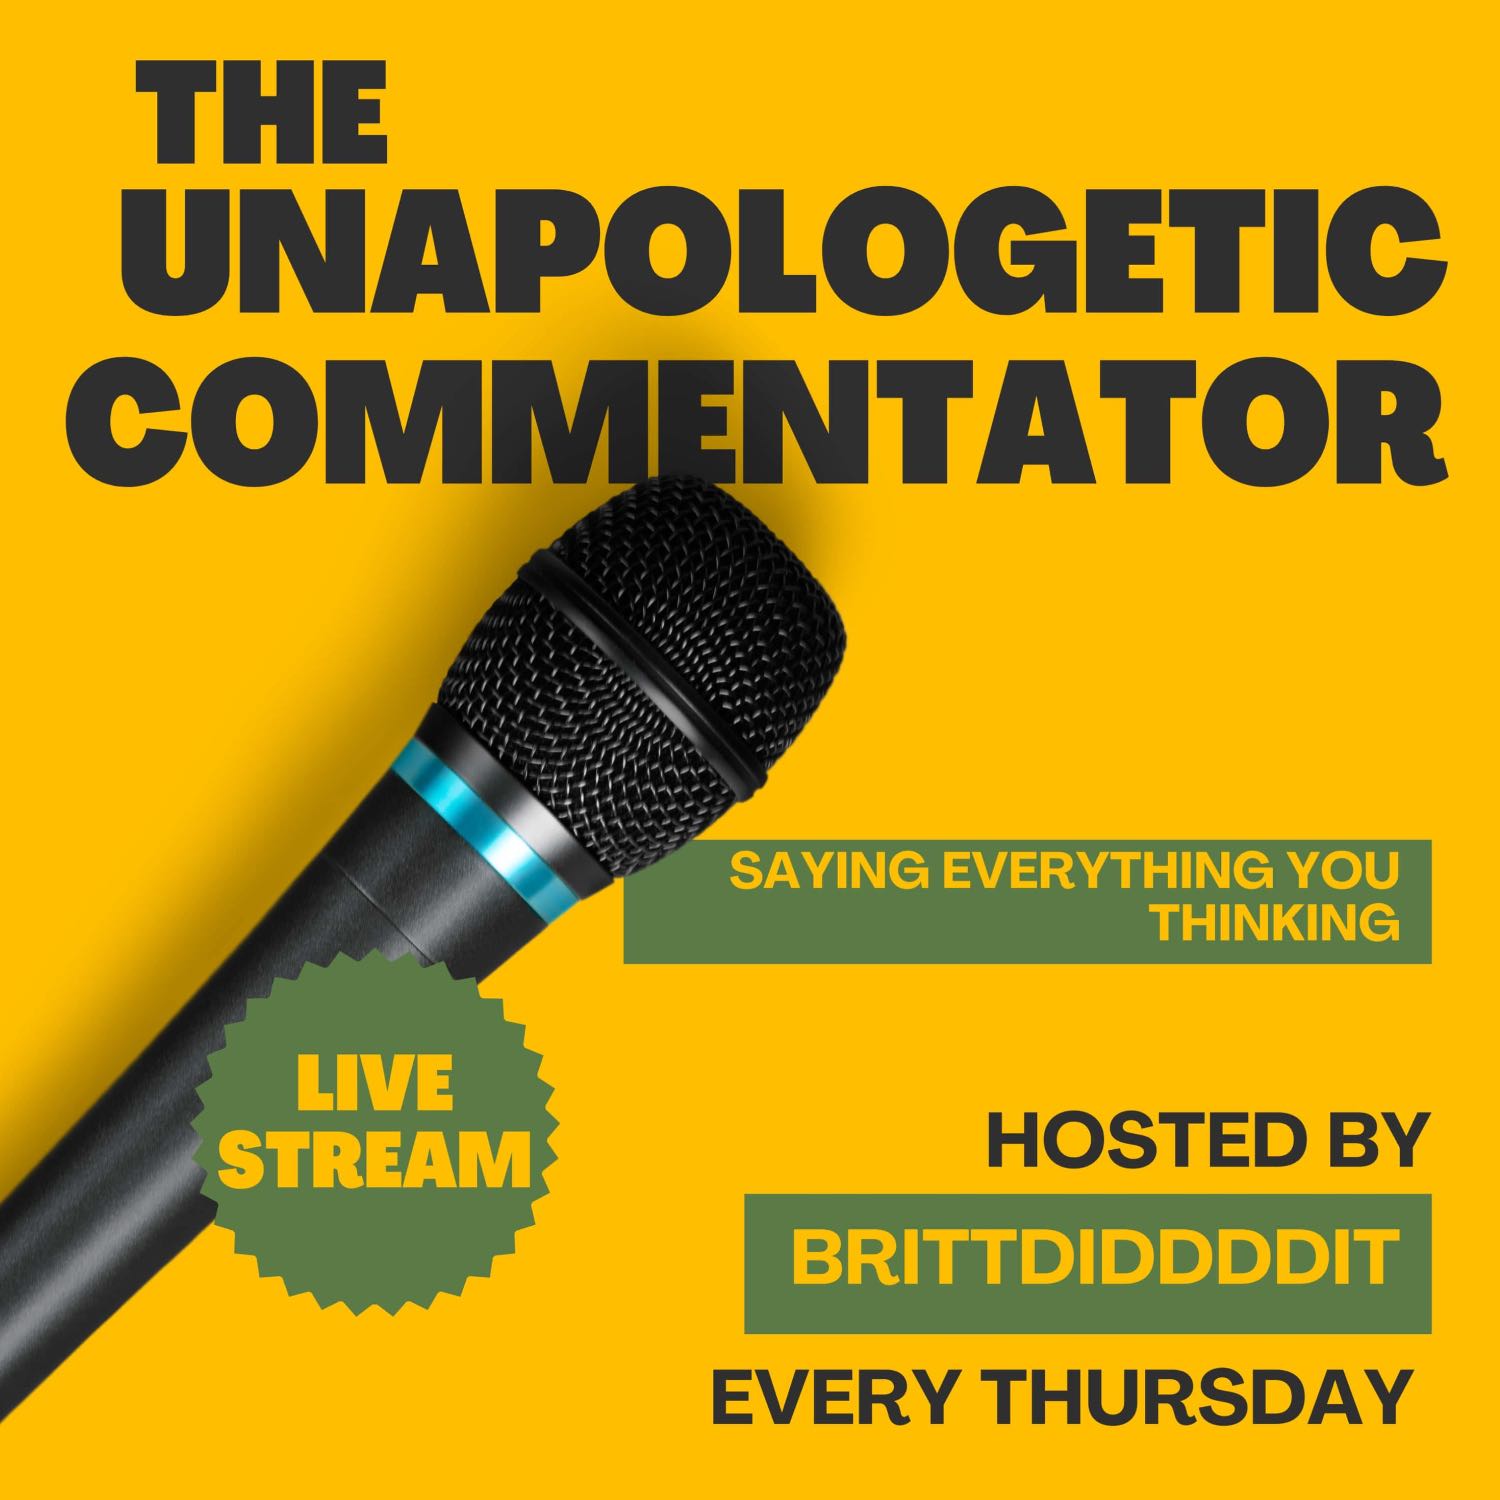 The unapologetic commentator